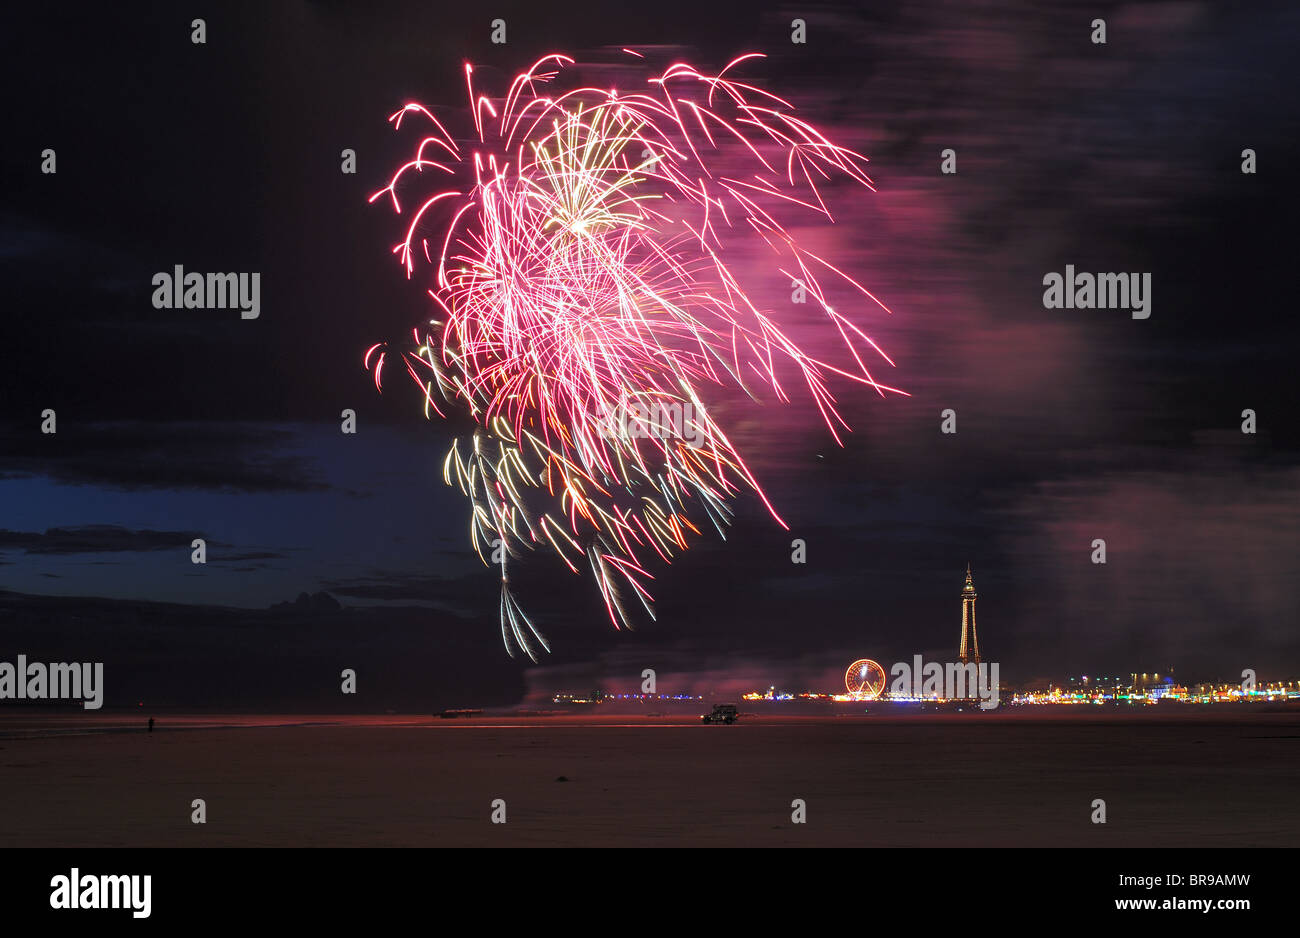 The French entry in the 2010 world fireworks competition at Blackpool Stock Photo